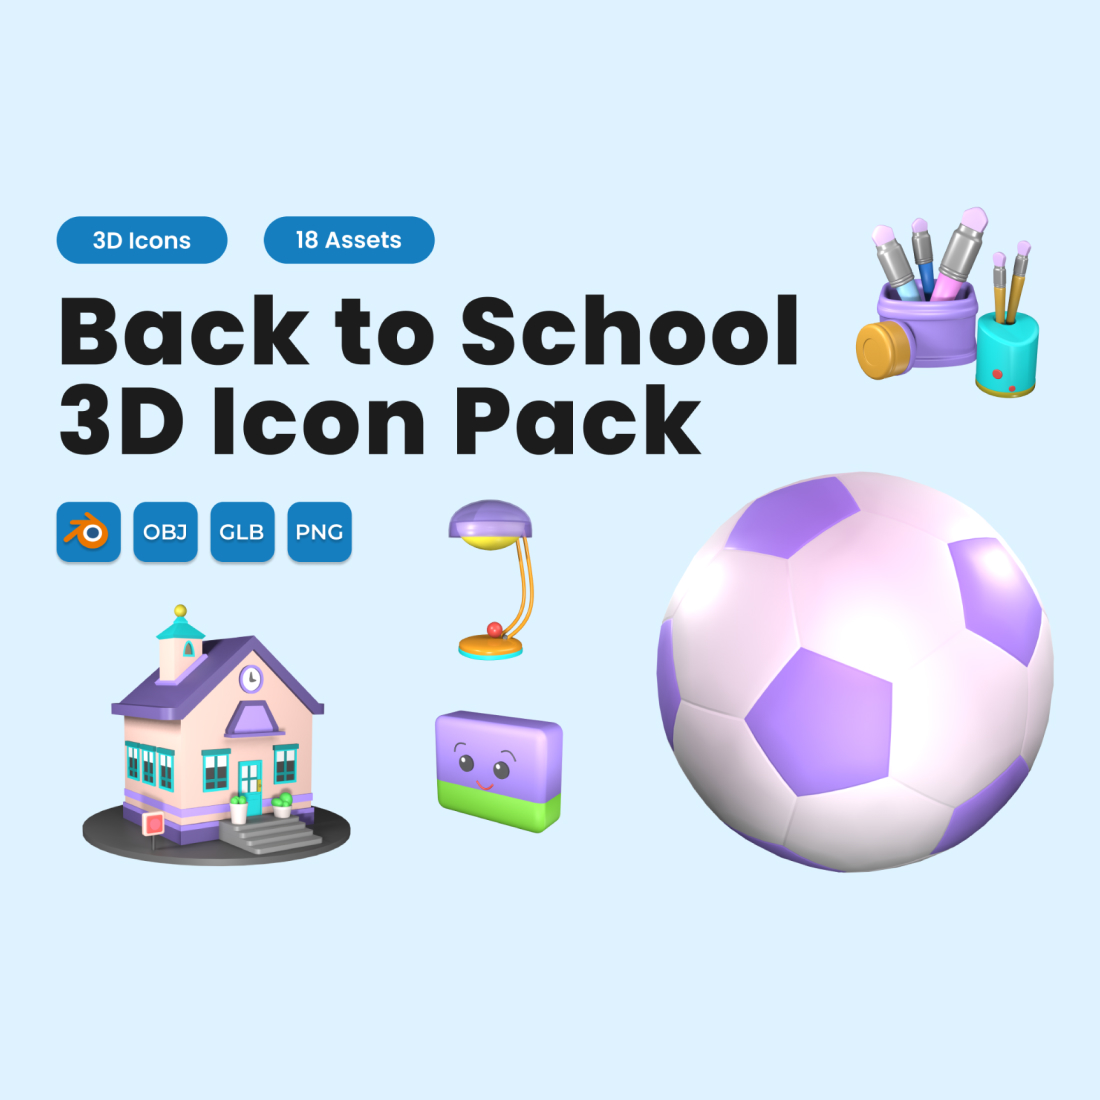 Back to School 3D Icon Pack Vol 4 preview image.